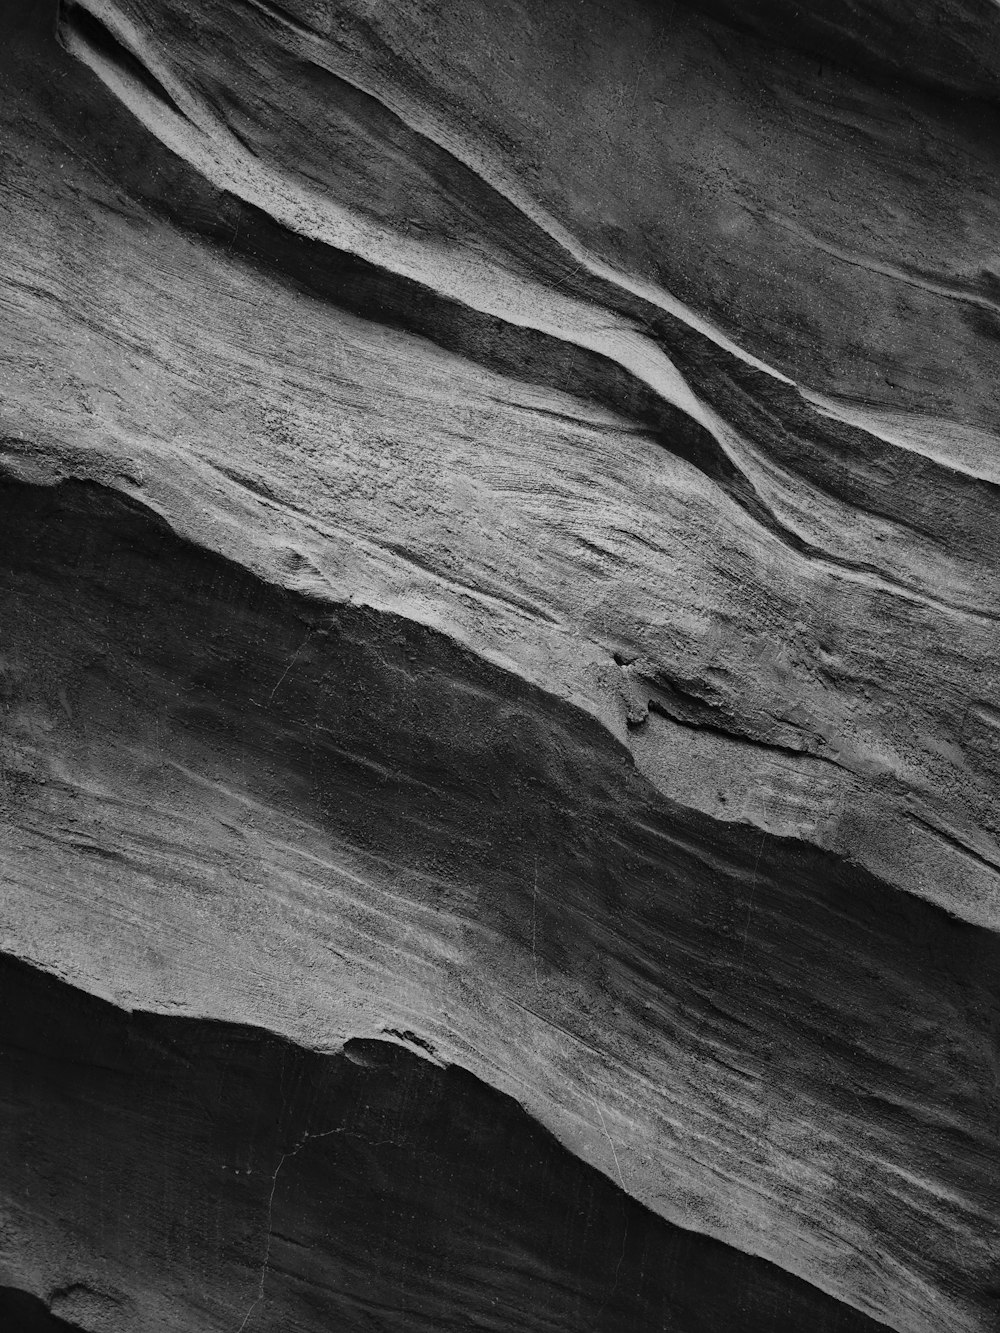 a black and white photo of a rock face